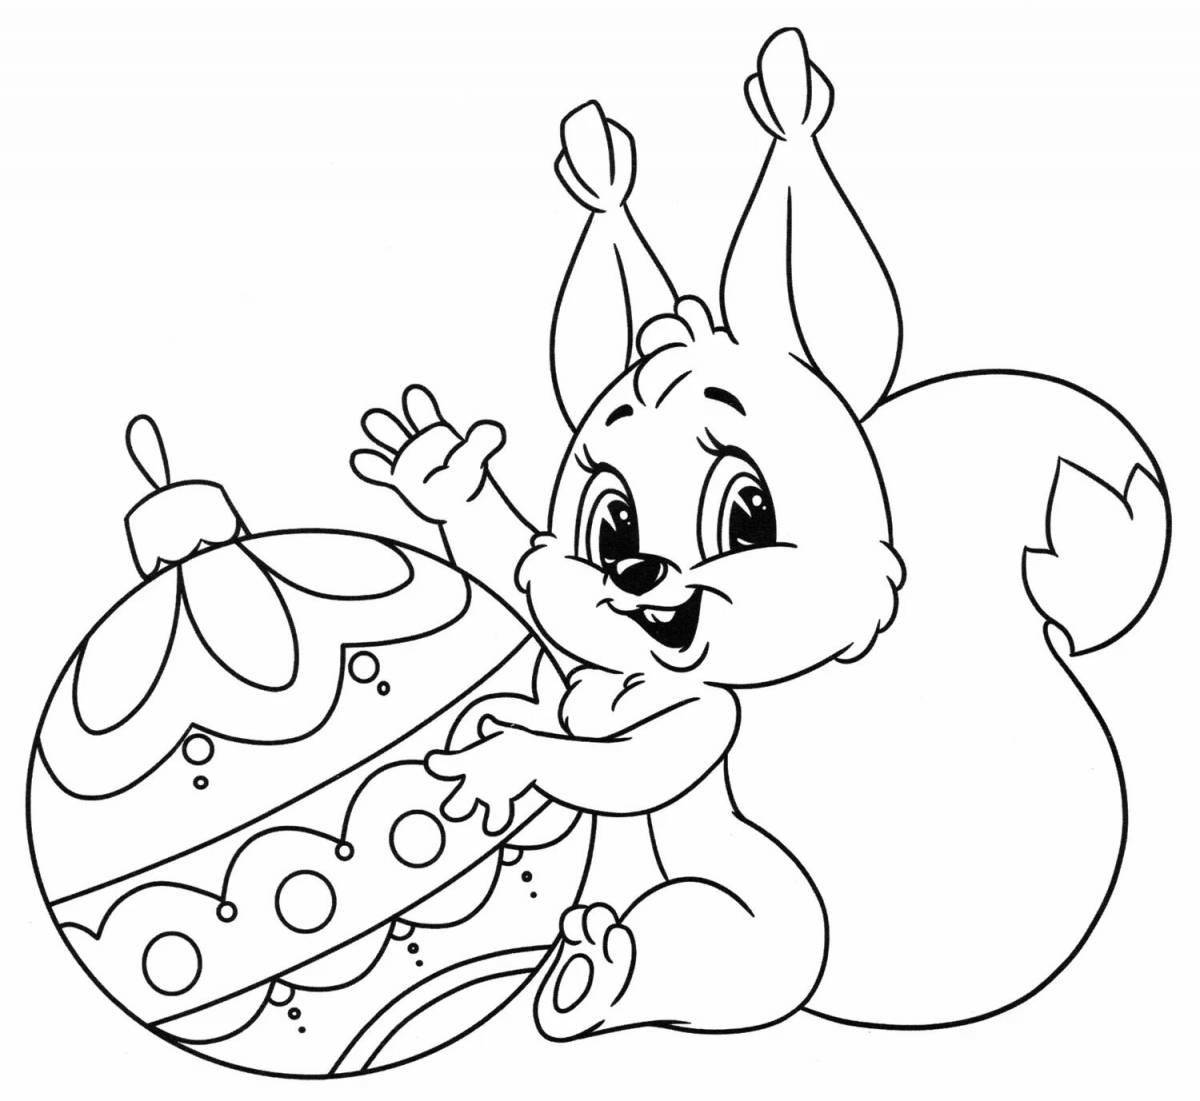 Coloring book happy hare and squirrel